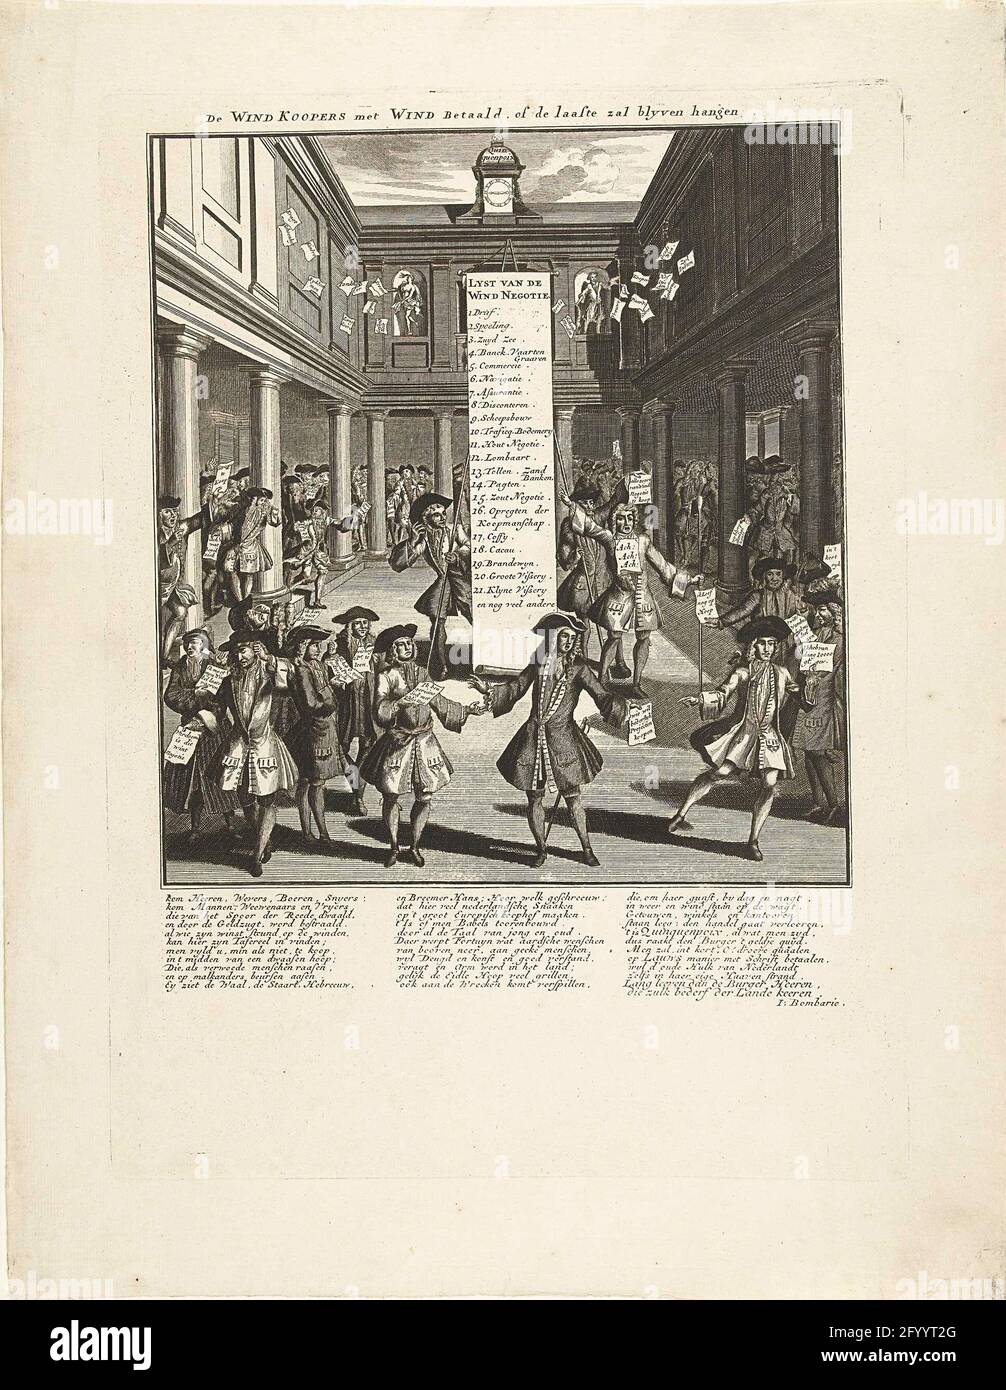 Desperate traders in the exhibition of Amsterdam, 1720; The wind buyers  with wind paid, or the last will hang blyven; The great scene of  foolishness. Desperate traders, victims of the wind trade,